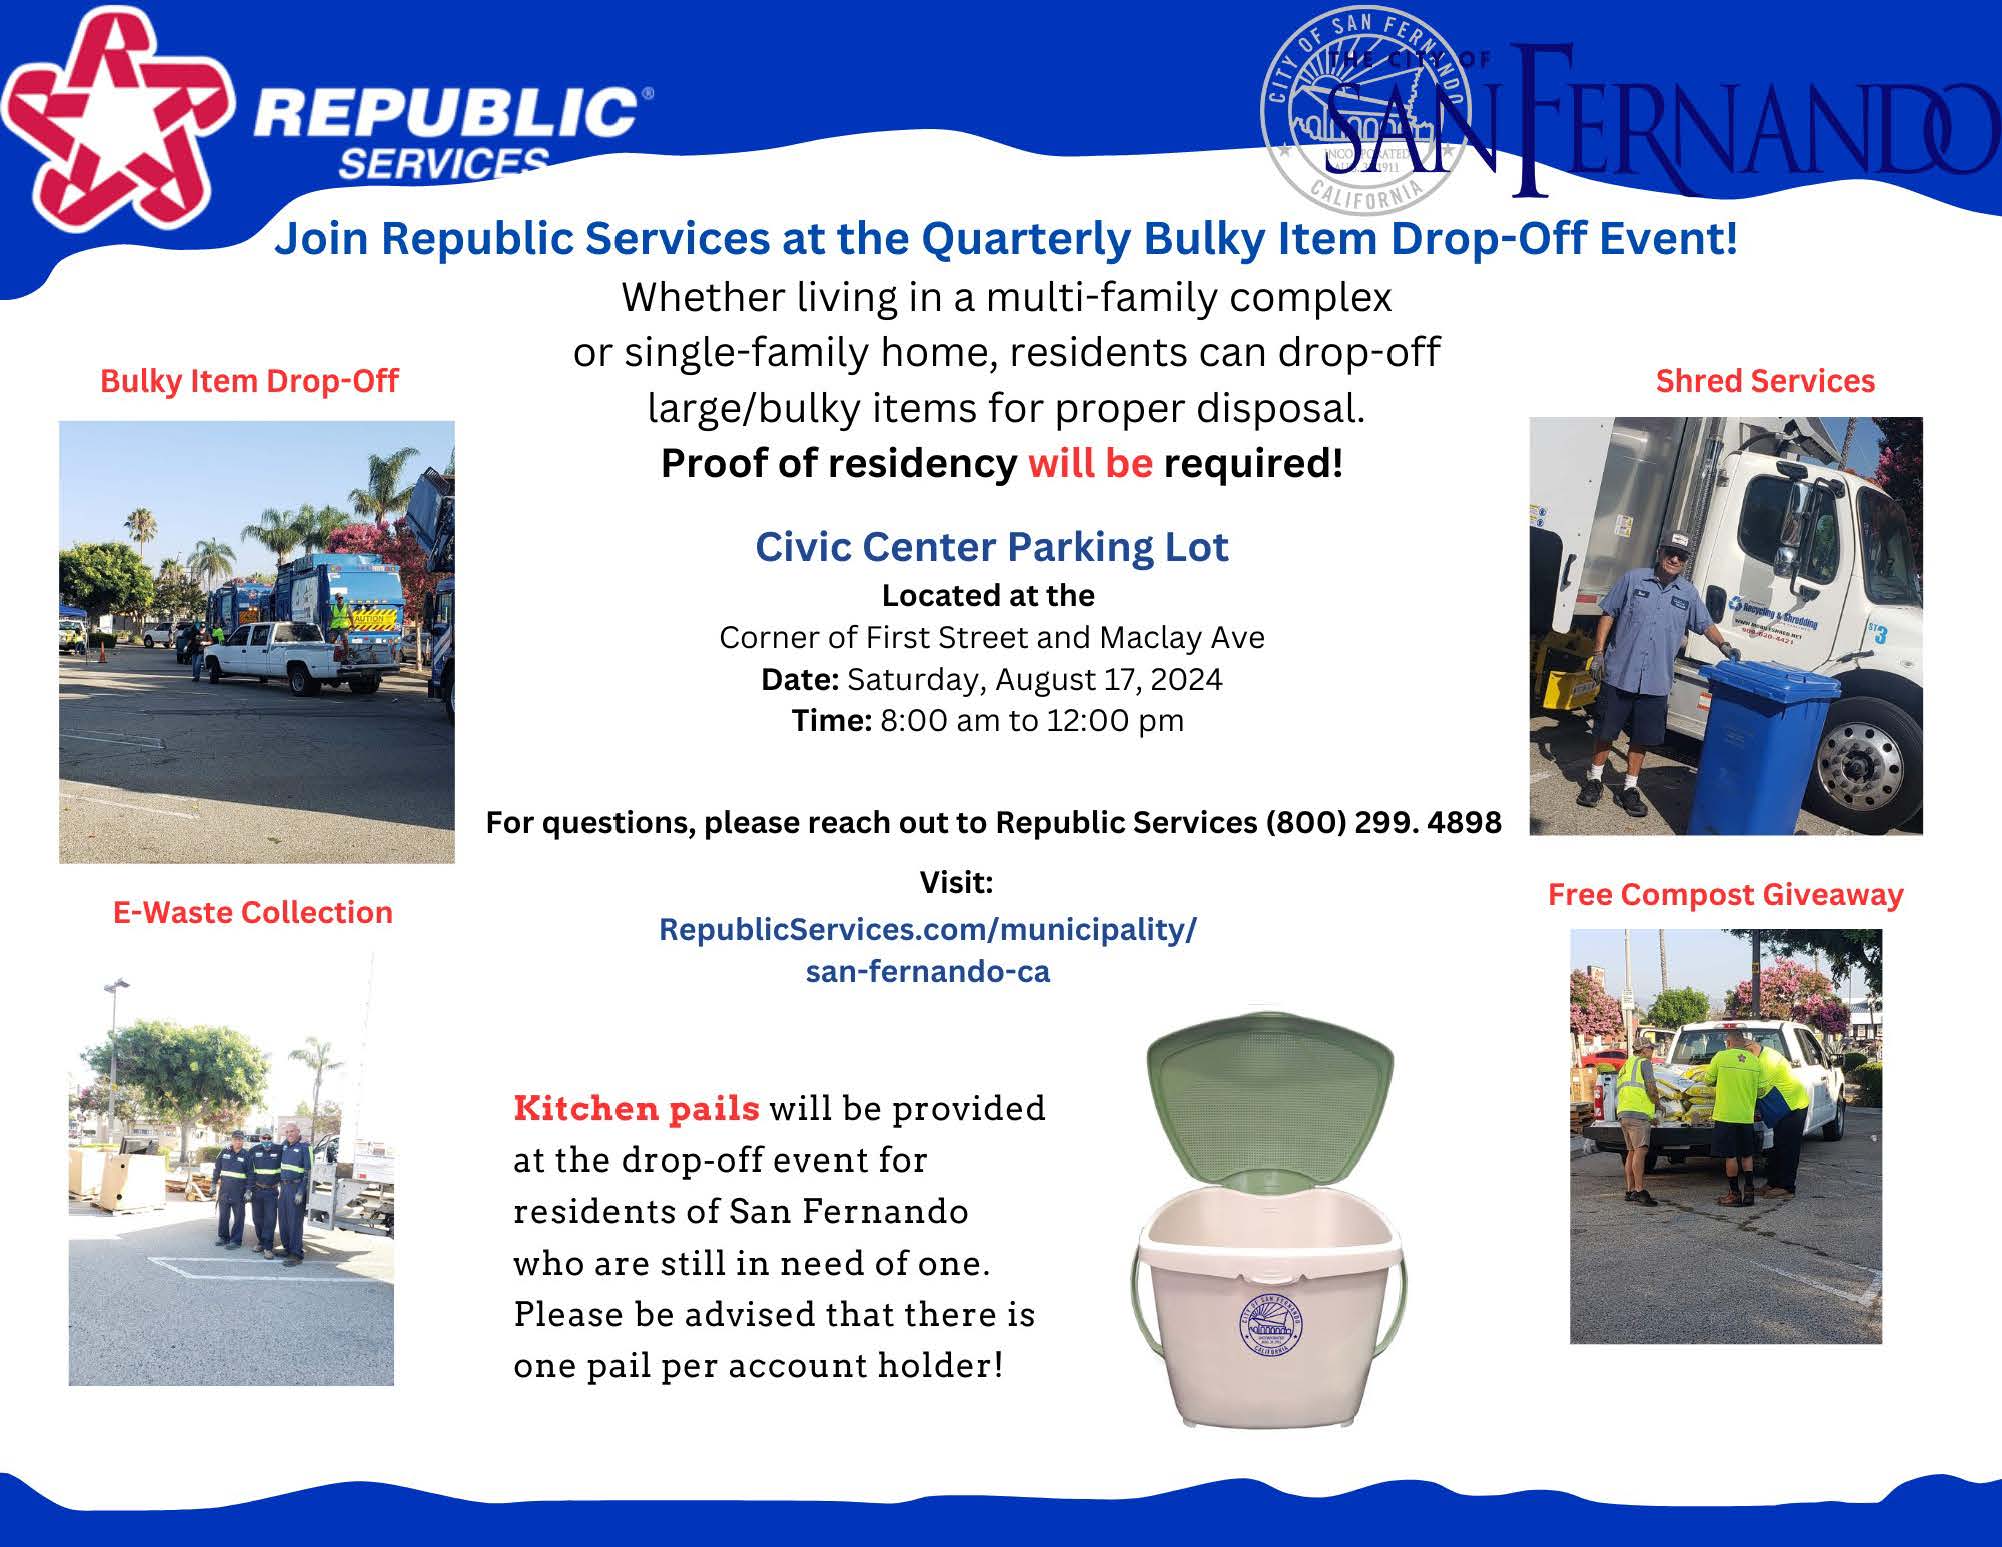 Graphic for Republic Services' Quarterly Bulky Item Drop-Off Event. Residents can drop off large items, e-waste, and shredding at the Civic Center Parking Lot on Saturday, August 17, 2024, from 8:00 am to 12:00 pm. Proof of residency required. Free compost and kitchen pails provided. For details, visit RepublicServices.com/municipality/san-fernando-ca or call (800) 299-4898.